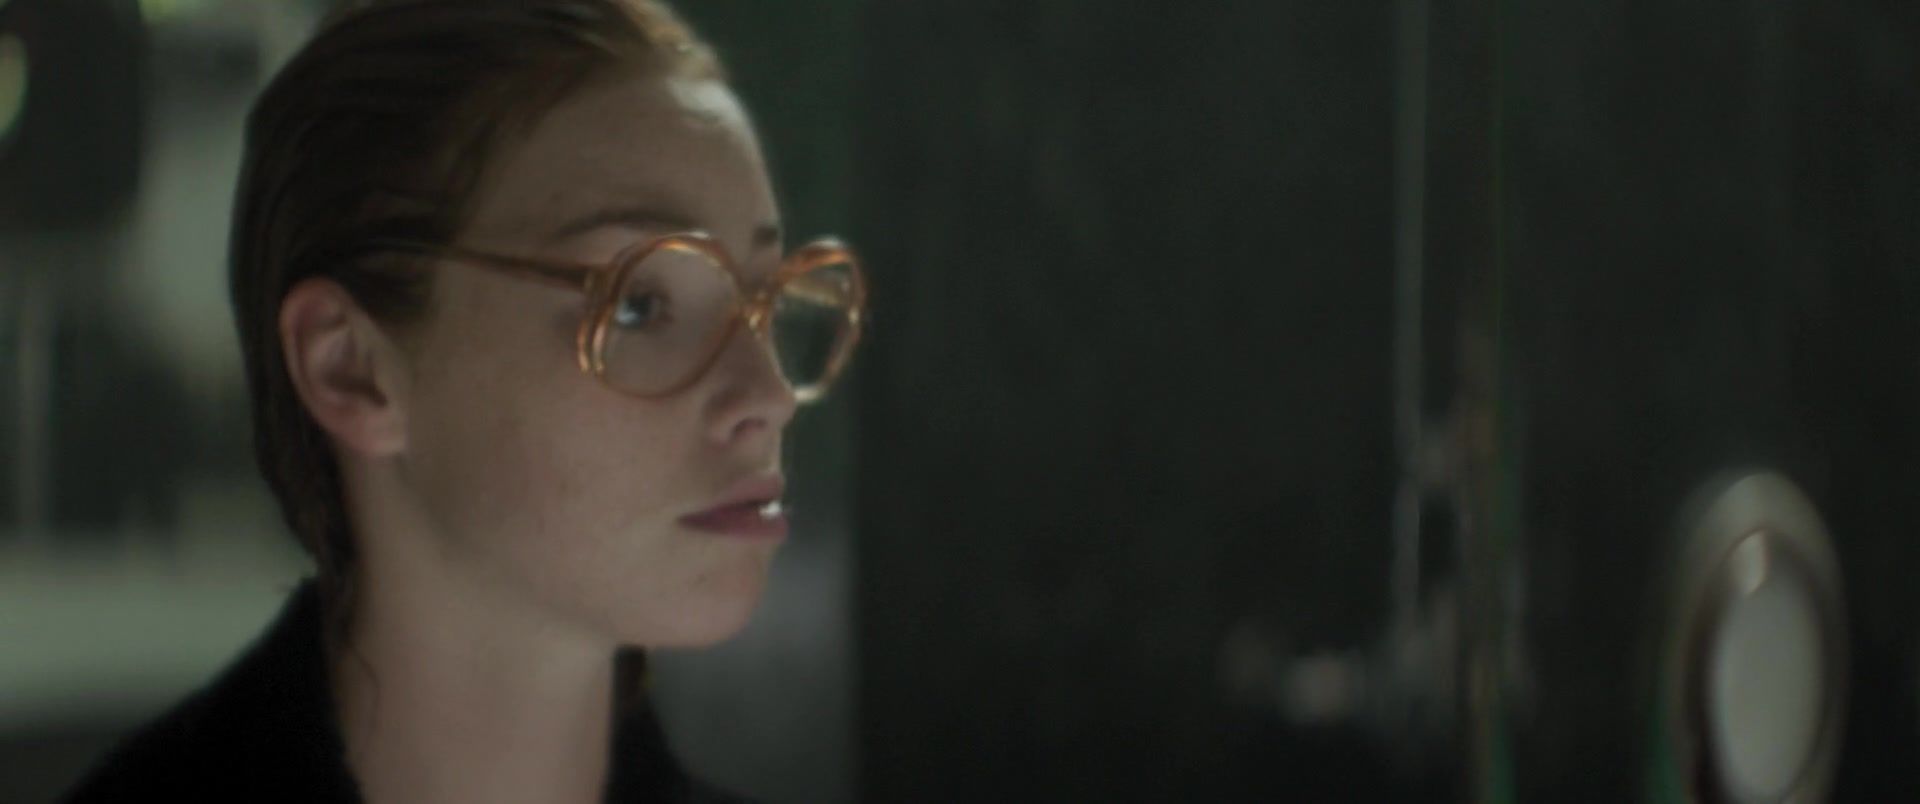 Curves Nude Freya Mavor - The Lady in the Car with Glasses and a Gun (2015) Double